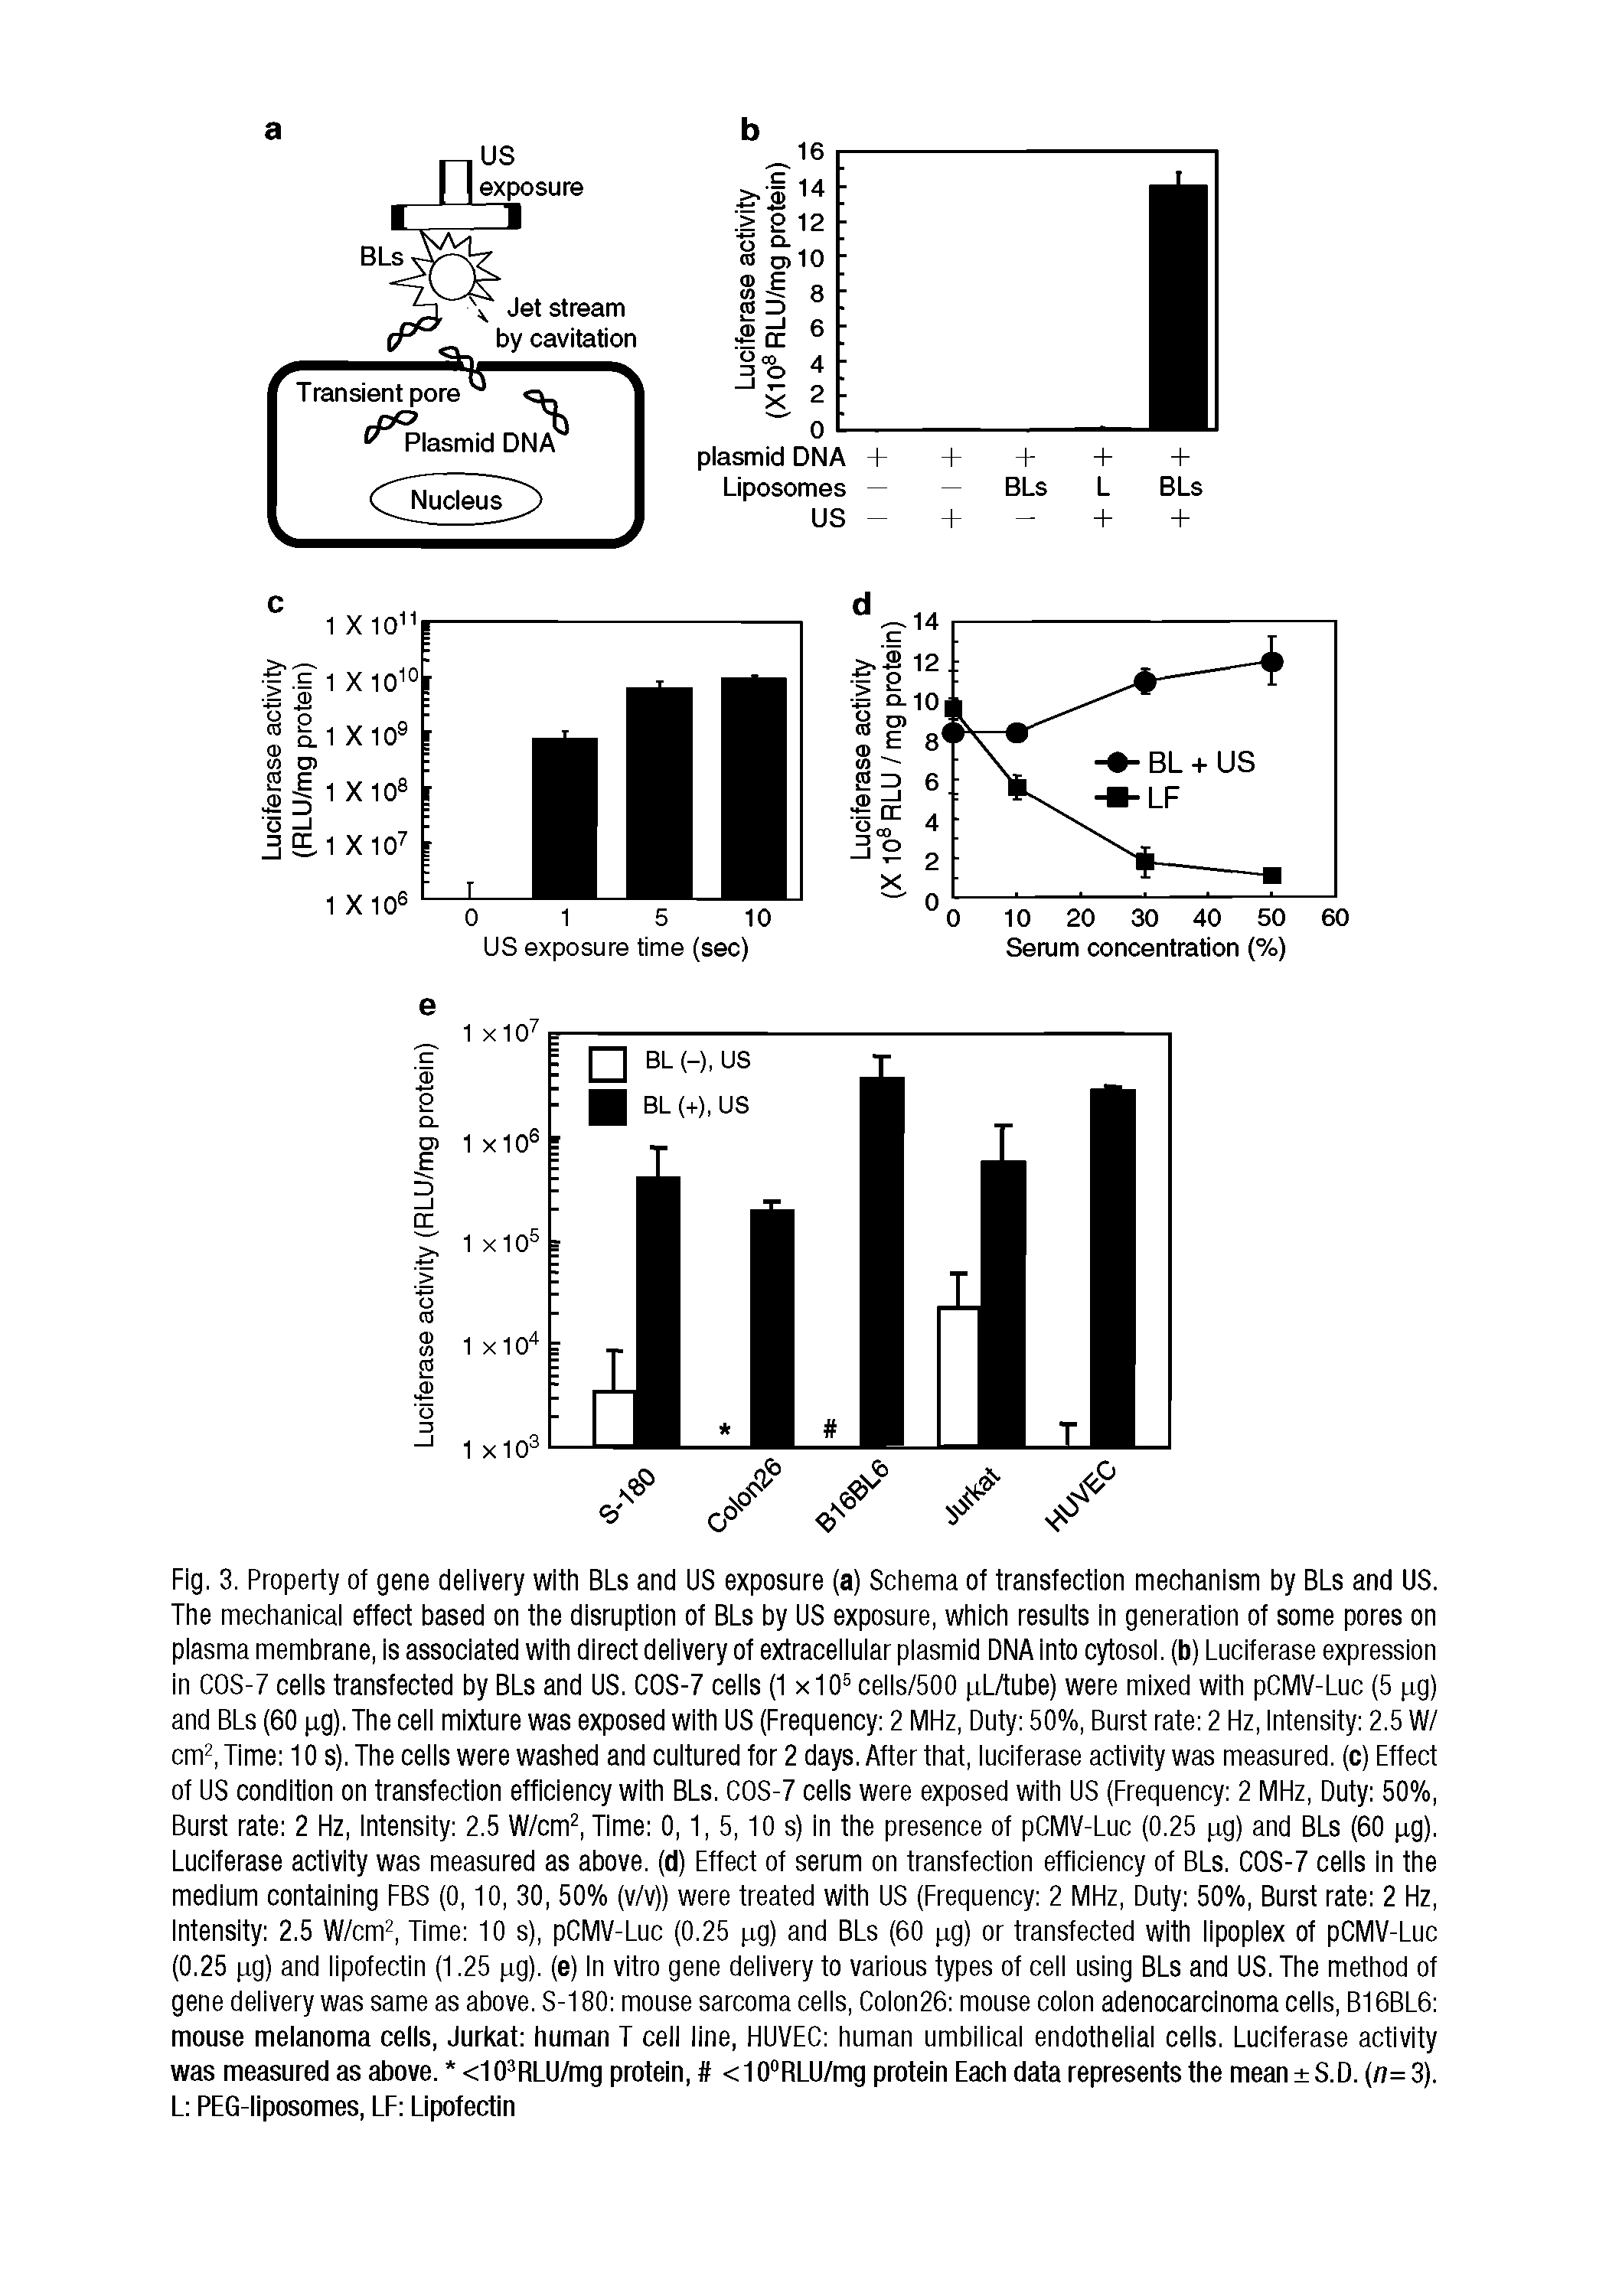 Fig. 3. Property of gene delivery with BLs and US exposure (a) Schema of transfection mechanism by BLs and US. The mechanical effect based on the disruption of BLs by US exposure, which results in generation of some pores on plasma membrane, is associated with direct delivery of extracellular plasmid DNA into cytosol, (b) Luciferase expression in COS-7 cells transfected by BLs and US. COS-7 cells (1x10 cells/500 pLAube) were mixed wifh pCMV-Luc (5 pg) and BLs (60 pg). The cell mixture was exposed with US (Frequency 2 MHz, Duty 50%, Burst rate 2 Hz, Intensity 2.5 W/ cm. Time 10 s). The cells were washed and cultured for 2 days. Affer fhaf, luciferase acfivify was measured, (c) Effecf of US condition on transfection efficiency with BLs. COS-7 cells were exposed with US (Frequency 2 MHz, Duty 50%, Burst rate 2 Hz, Intensity 2.5 W/cm Time 0,1, 5,10 s) in the presence of pCMV-Luc (0.25 pg) and BLs (60 pg). Luciferase activity was measured as above, (d) Effect of serum on transfection efficiency of BLs. COS-7 cells in the medium containing EBS (0,10, 30, 50% (v/v)) were treated with US (Erequency 2 MHz, Duty 50%, Burst rate 2 Hz, Intensity 2.5 W/cm, Time 10 s), pCMV-Luc (0.25 pg) and BLs (60 pg) or transfected with lipoplex of pCMV-Luc (0.25 pg) and lipofectin (1.25 pg). (e) In vitro gene delivery to various types of cell using BLs and US. The method of gene delivery was same as above. S-180 mouse sarcoma cells, Colon26 mouse colon adenocarcinoma cells, B16BL6 mouse melanoma cells, Jurkat human T cell line, HUVEC human umbilical endothelial cells. Luciferase activity was measured as above. <10 RLU/mg protein, <10 RLU/mg protein Each data represents the mean S.D. n=3). L PEG-liposomes, LF Lipotectin...